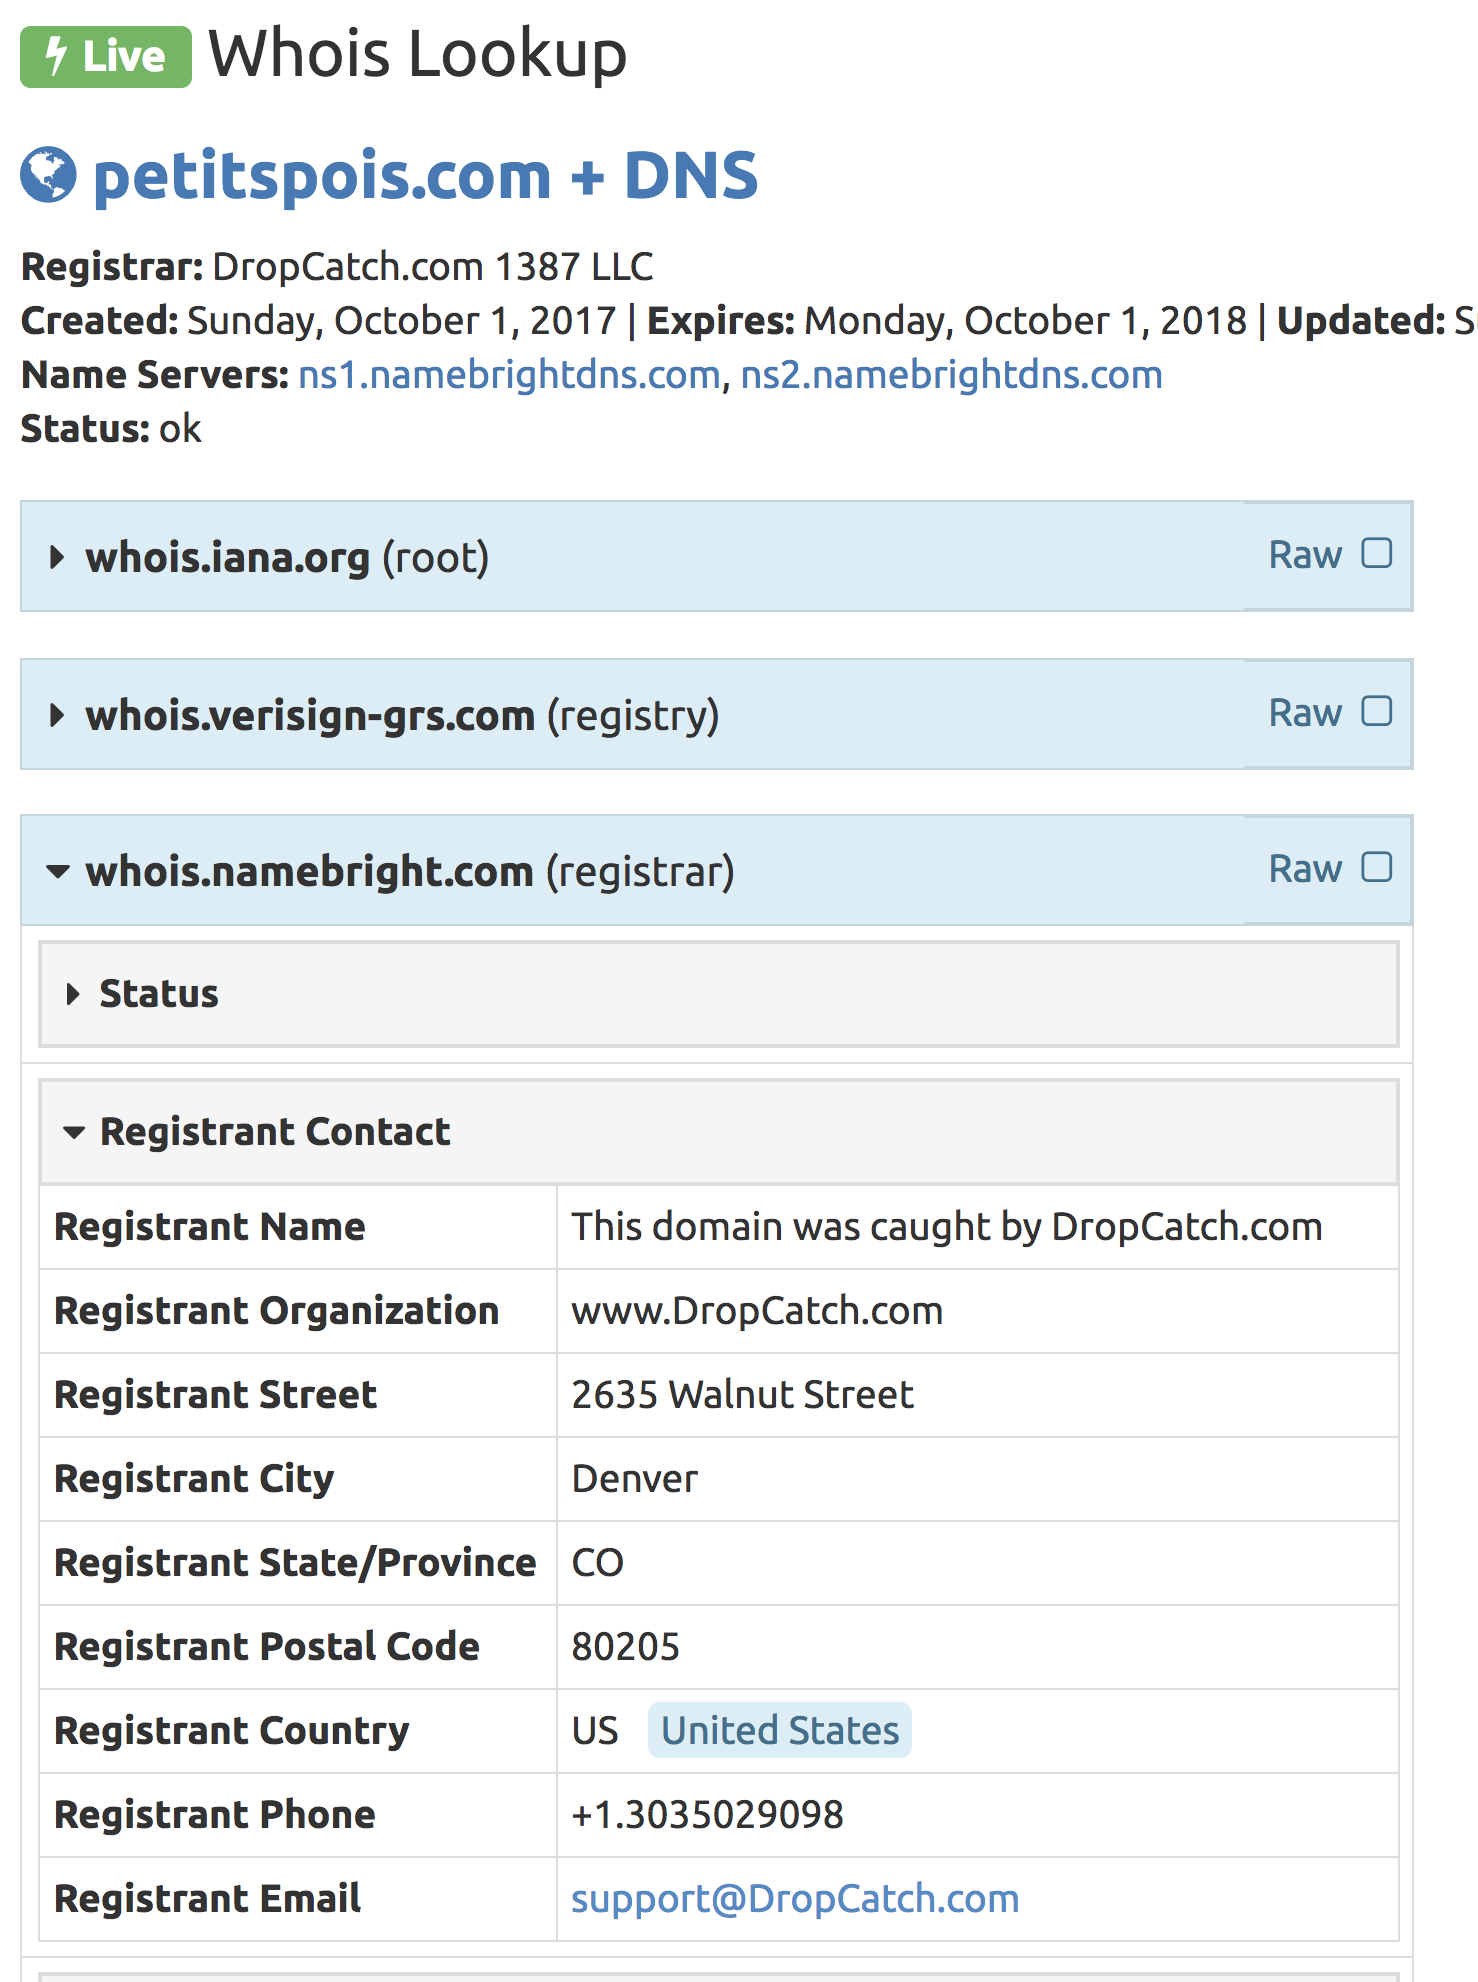 WHOIS5.png